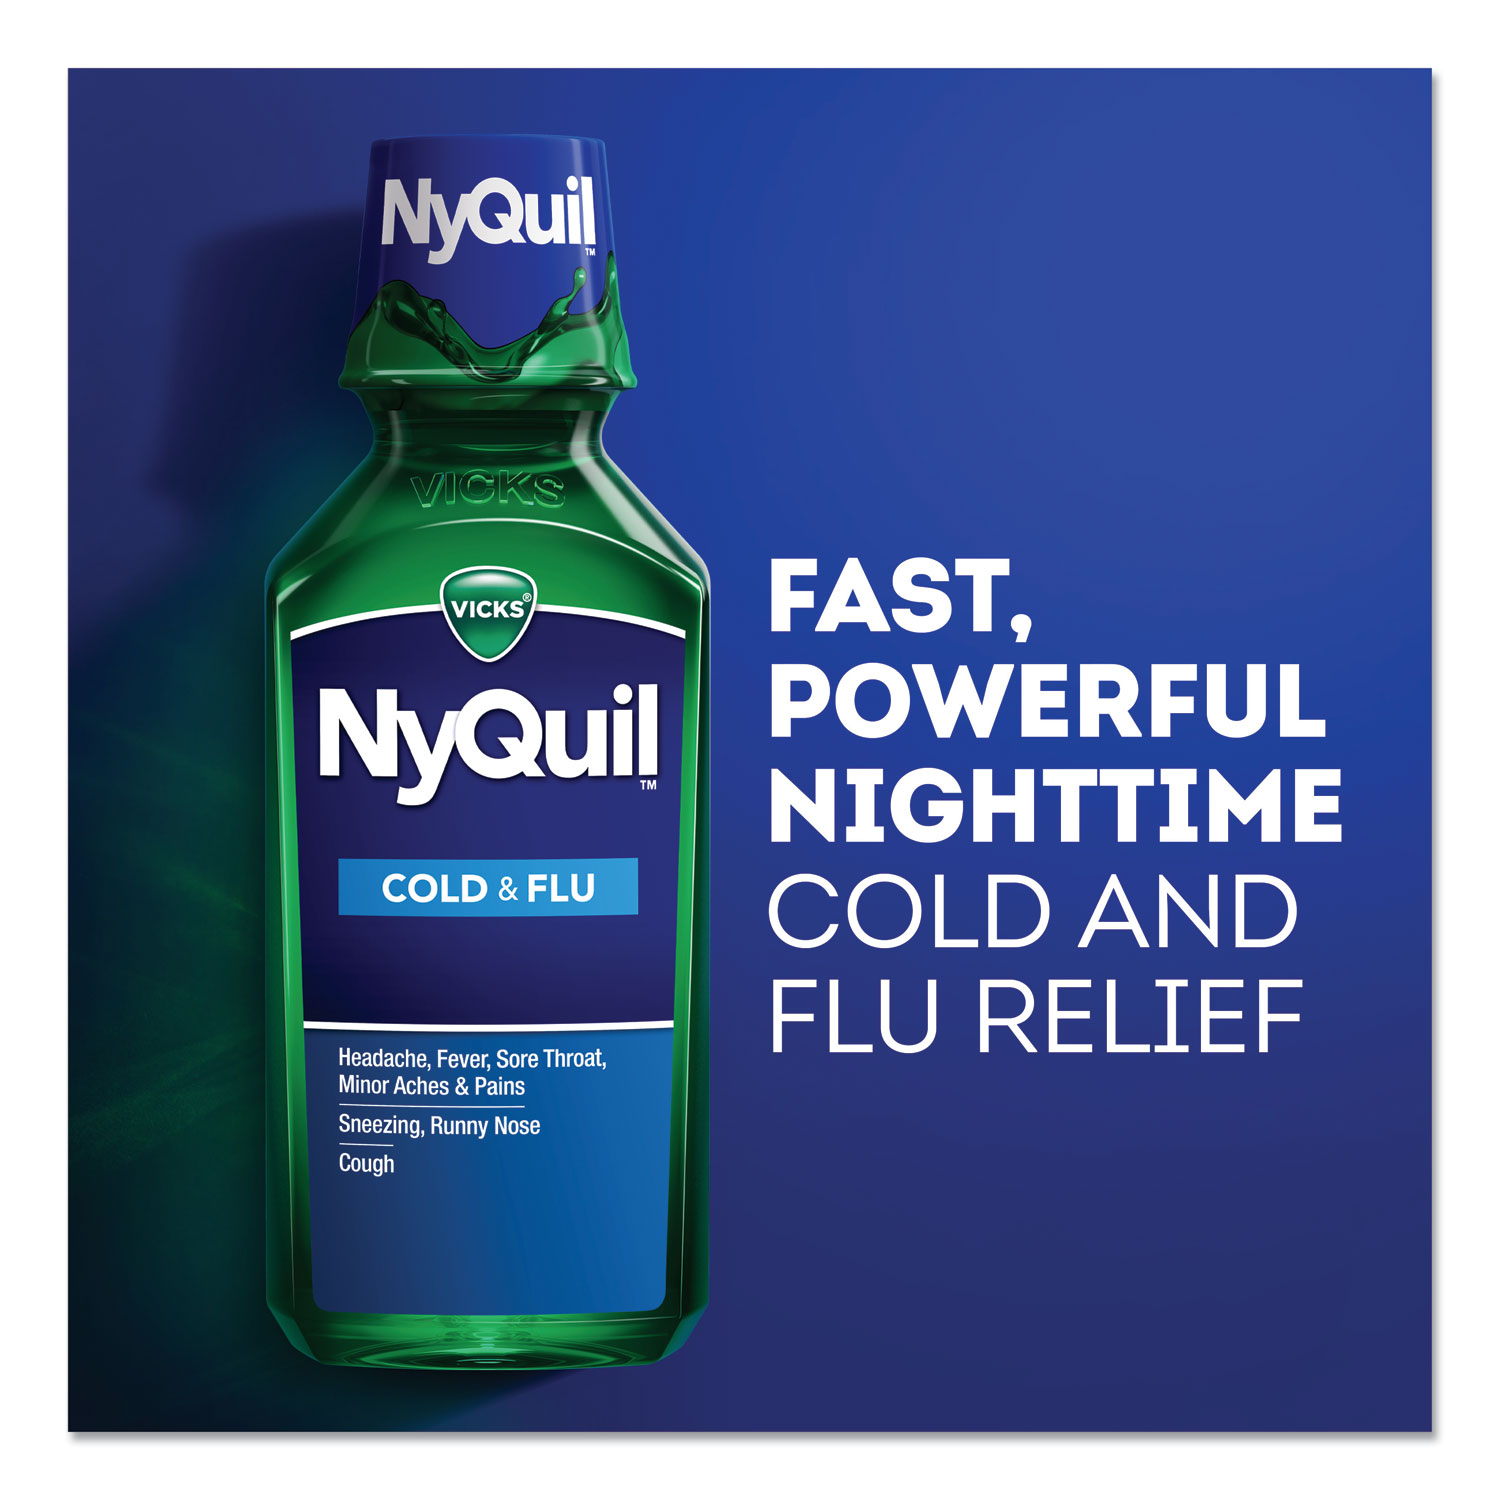 A you happens what nyquil drink bottle half if of How Much